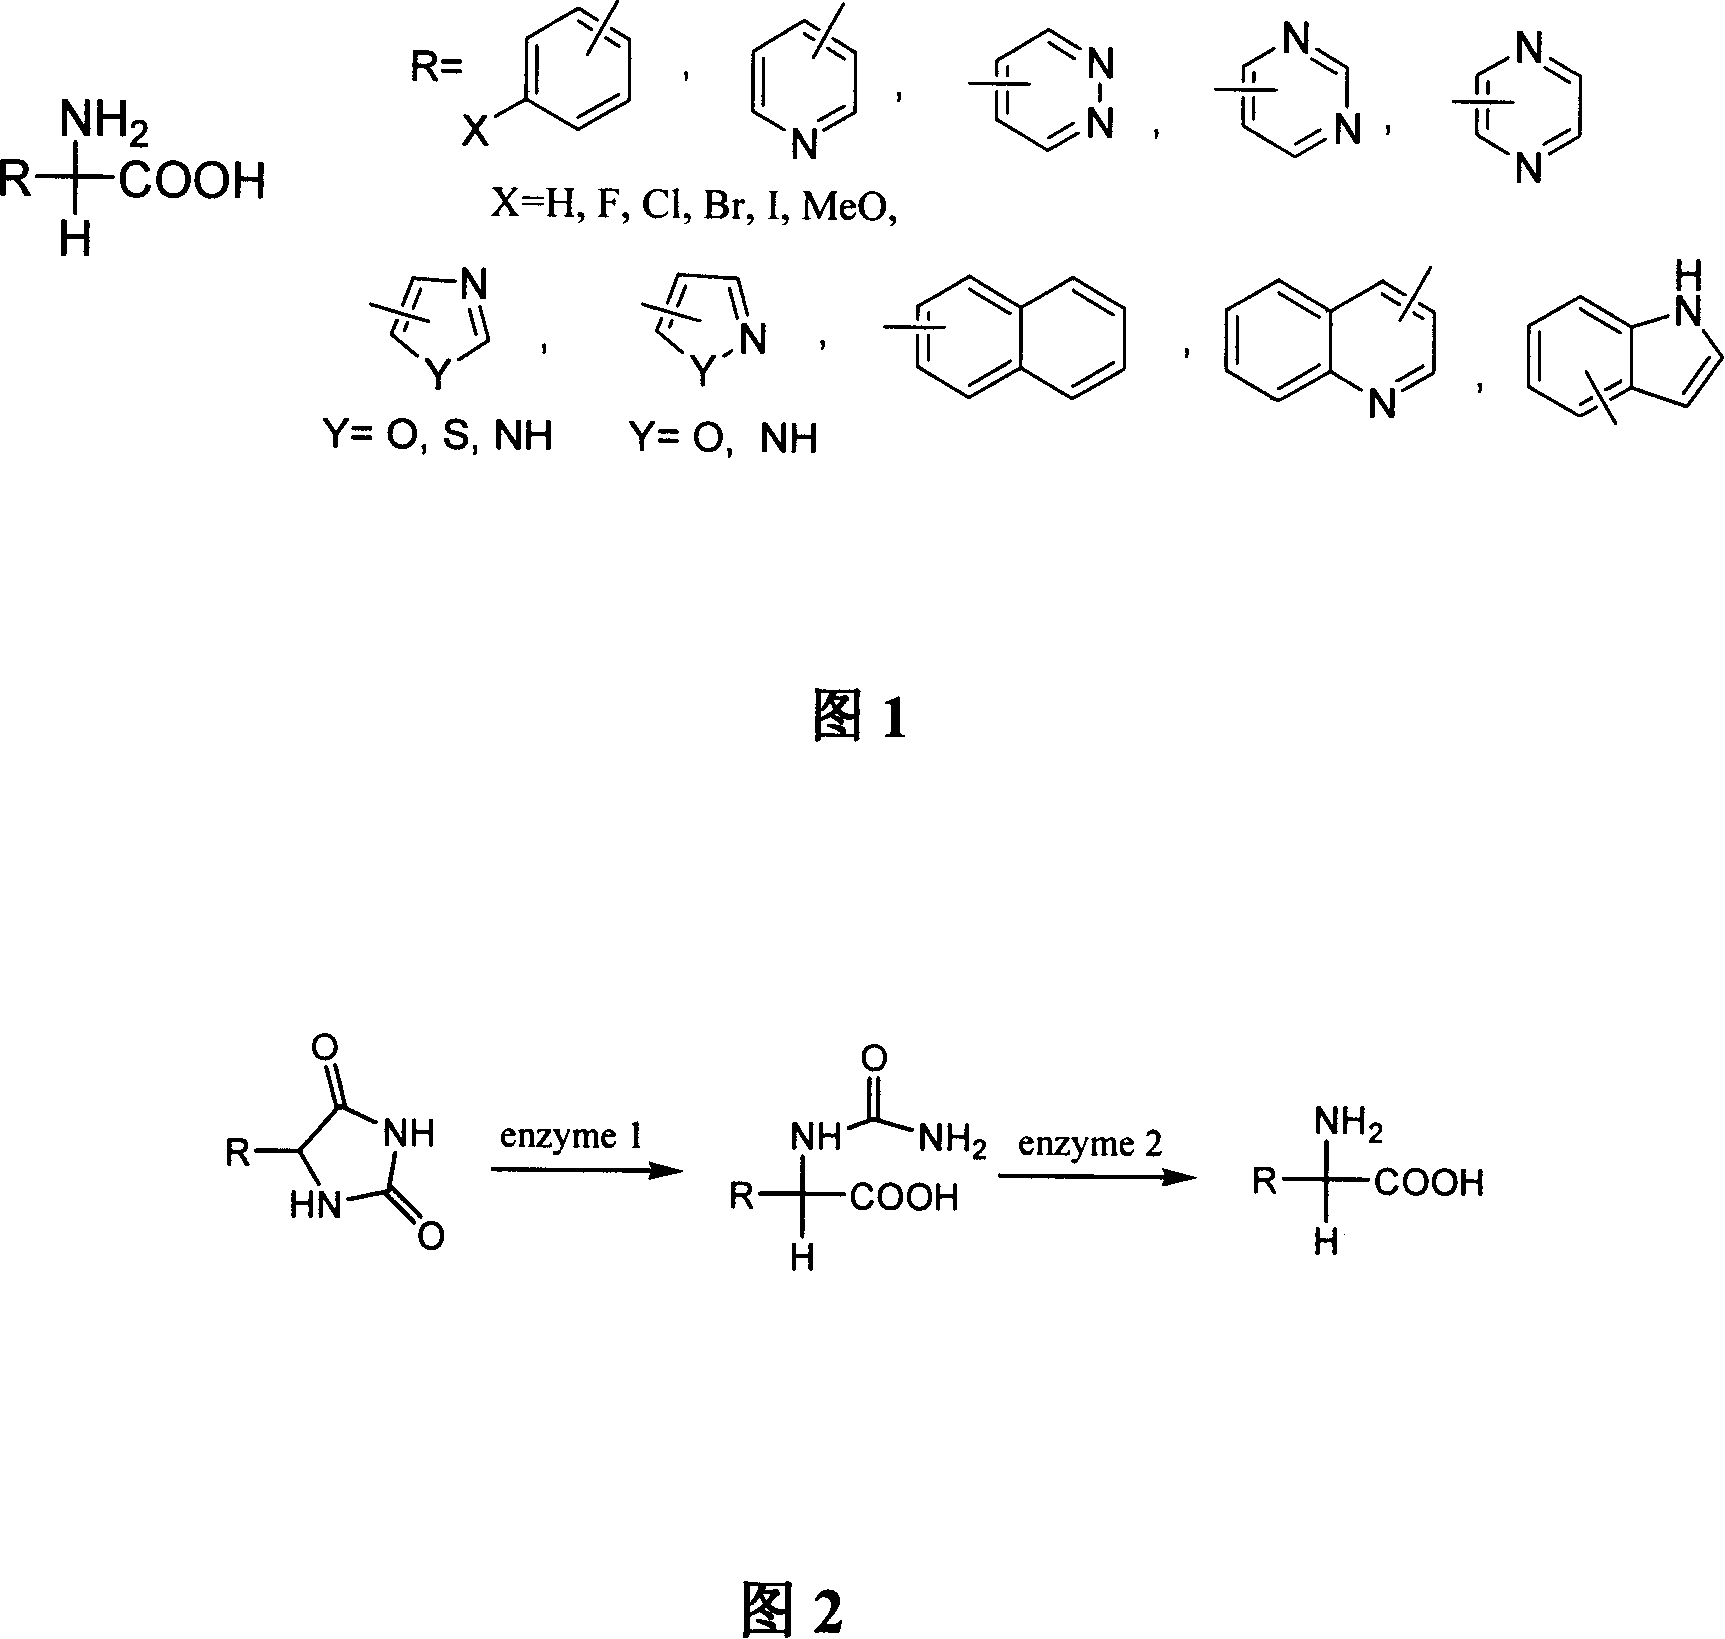 Method for synthesizing D-arylglycine by using heterogeneous enzyme to catalytically hydrolyzing 5-arylhydantoin